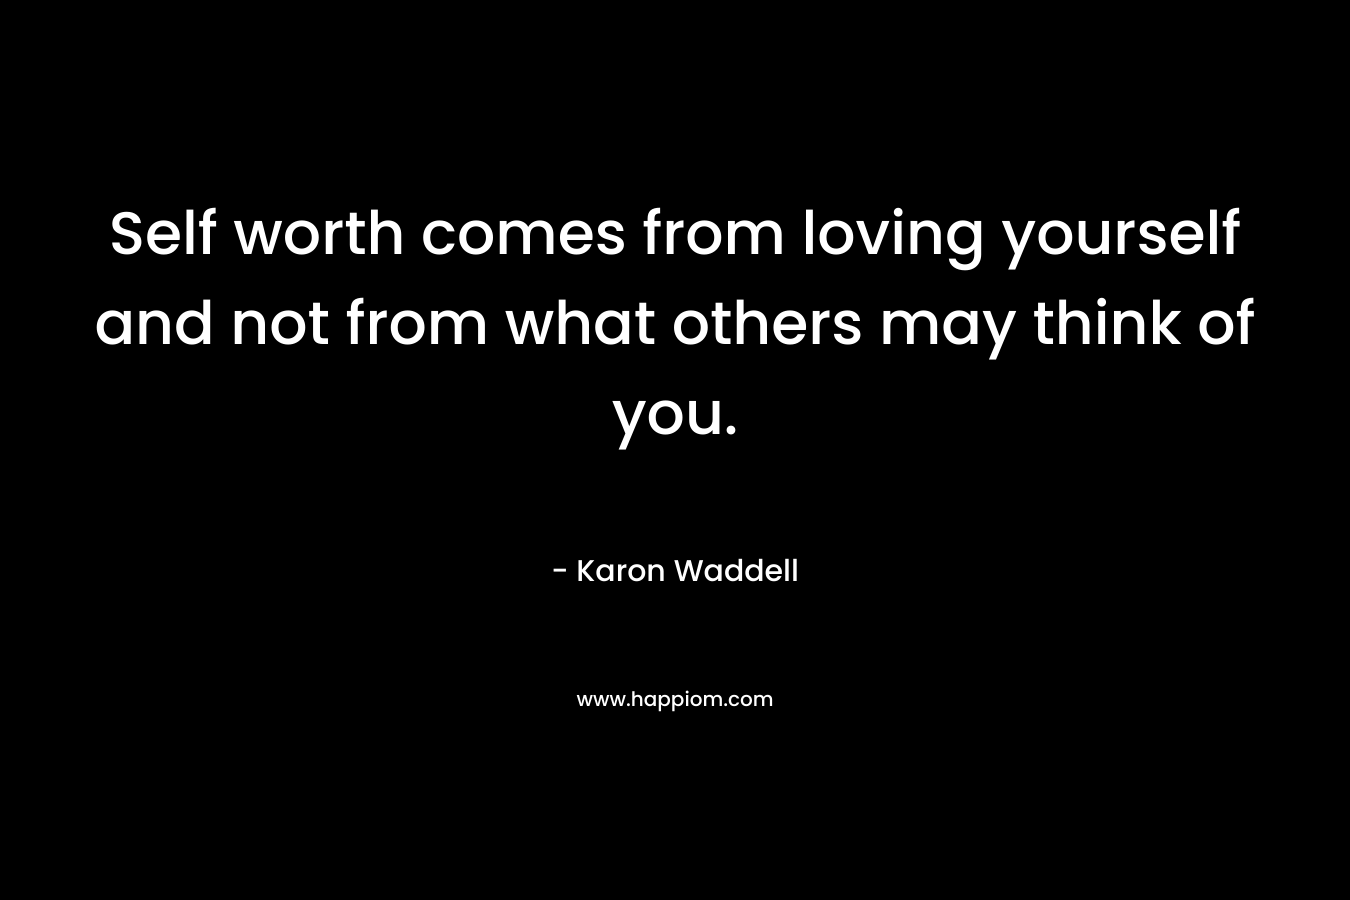 Self worth comes from loving yourself and not from what others may think of you.